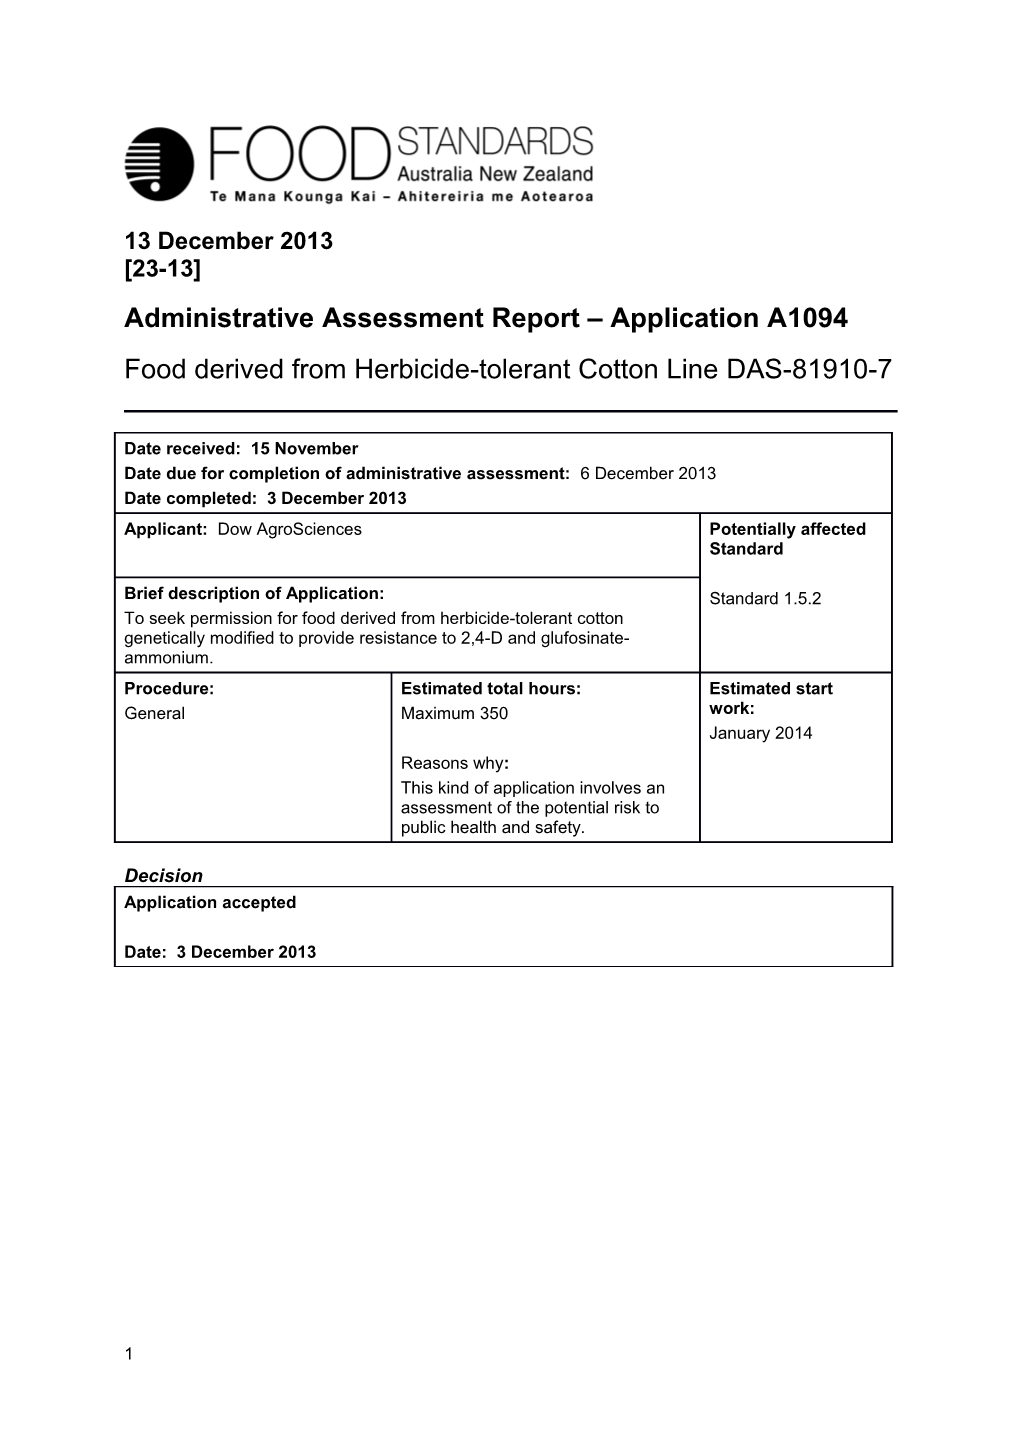 Administrative Assessment Report Application A1094